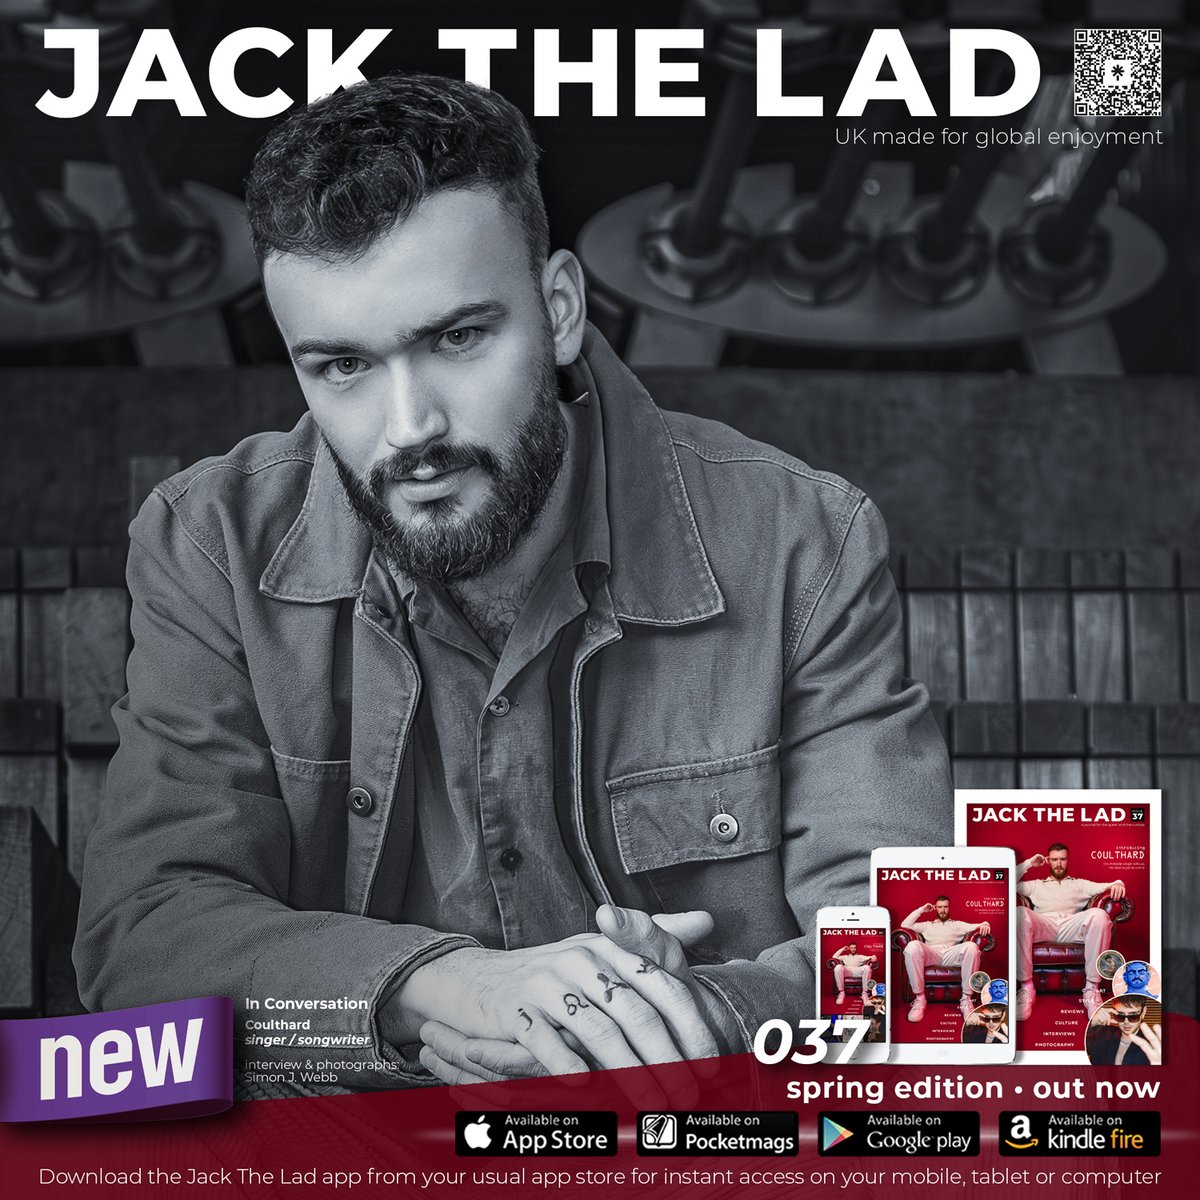 Covering club classic ‘Toca’s Miracle’ was just the start of Coulthard's musical journey as our Issue 37 coverstar proved with his recent self-penned single release 'Climax'. You'll find his exclusive interview & photoshoot only in Jack The Lad, out now! linktr.ee/jacktheladmag